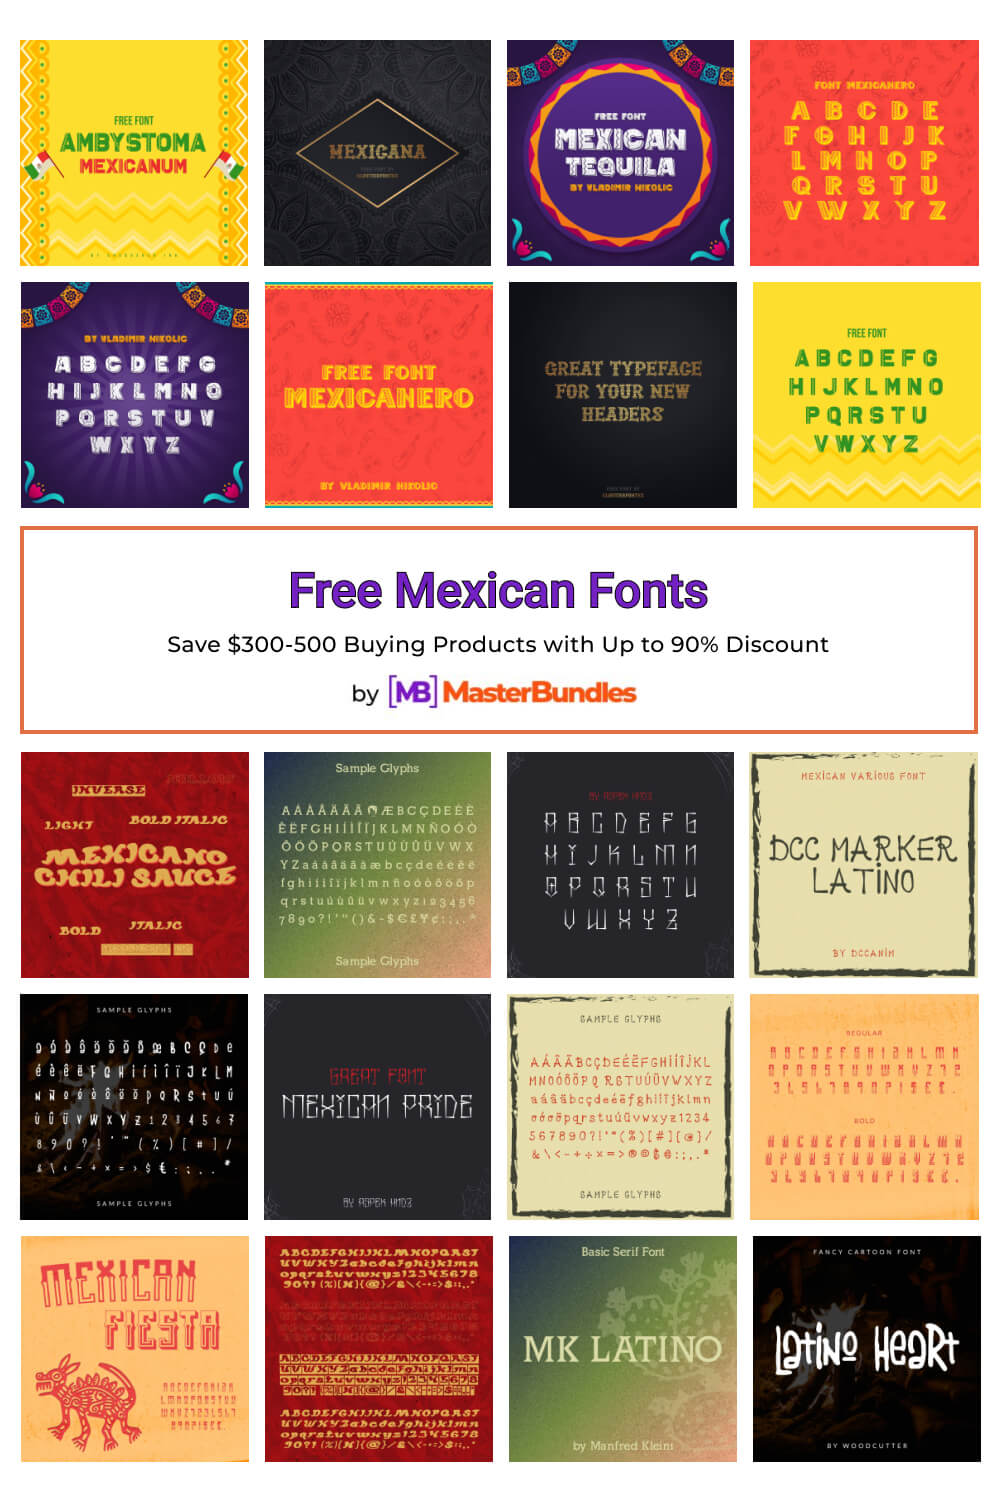 free mexican fonts pinterest image.